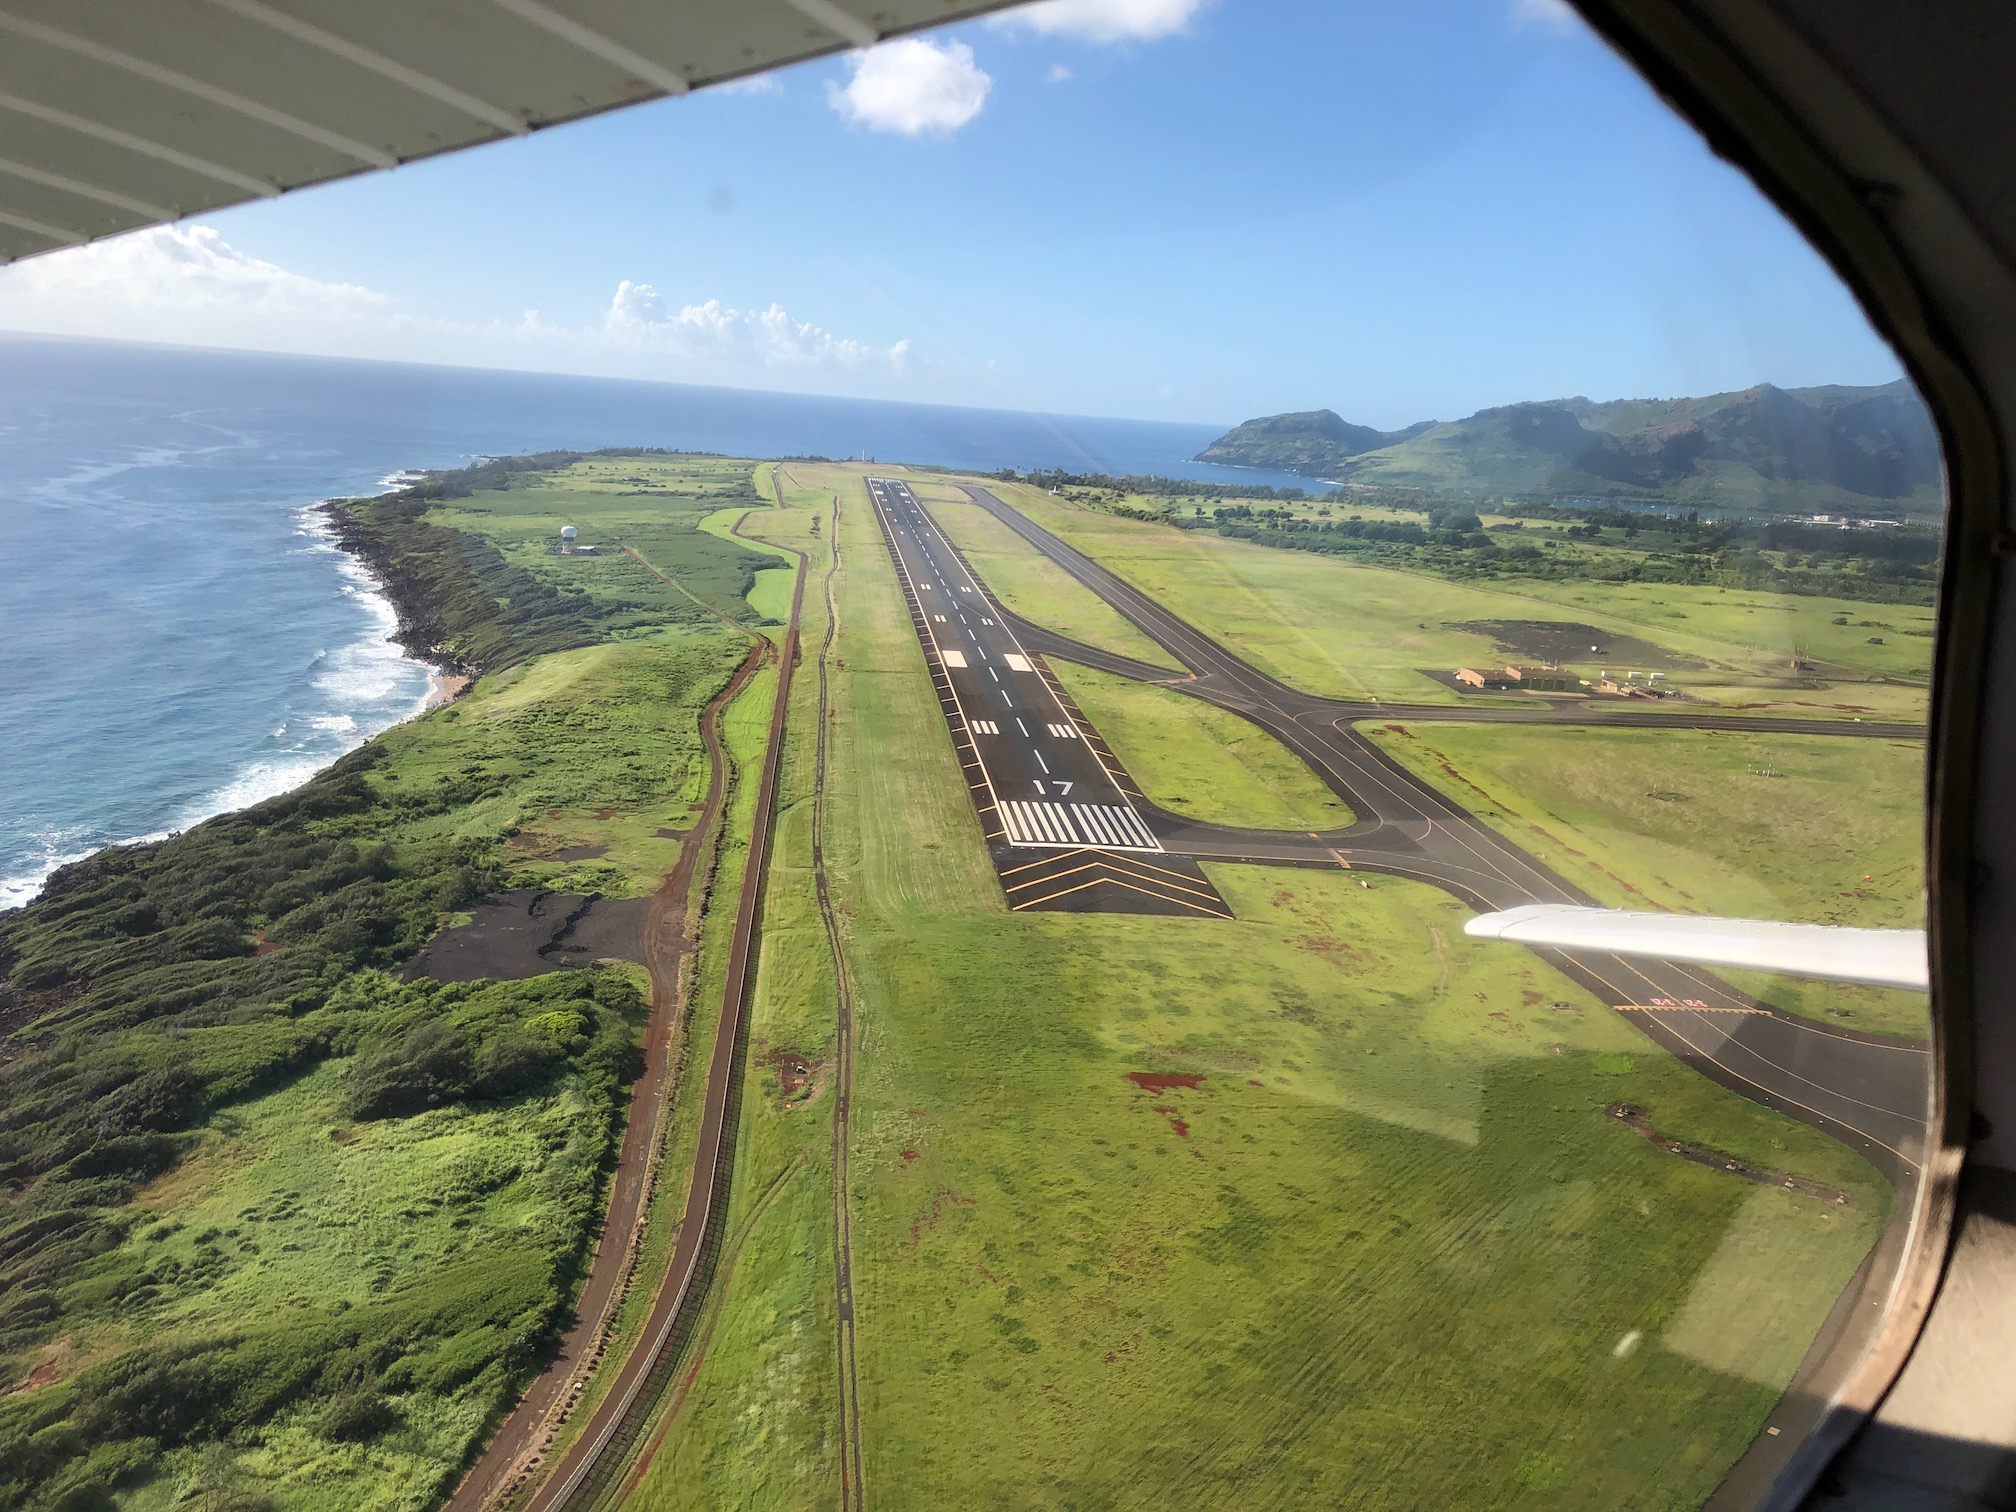 takeoff from Lihue airport